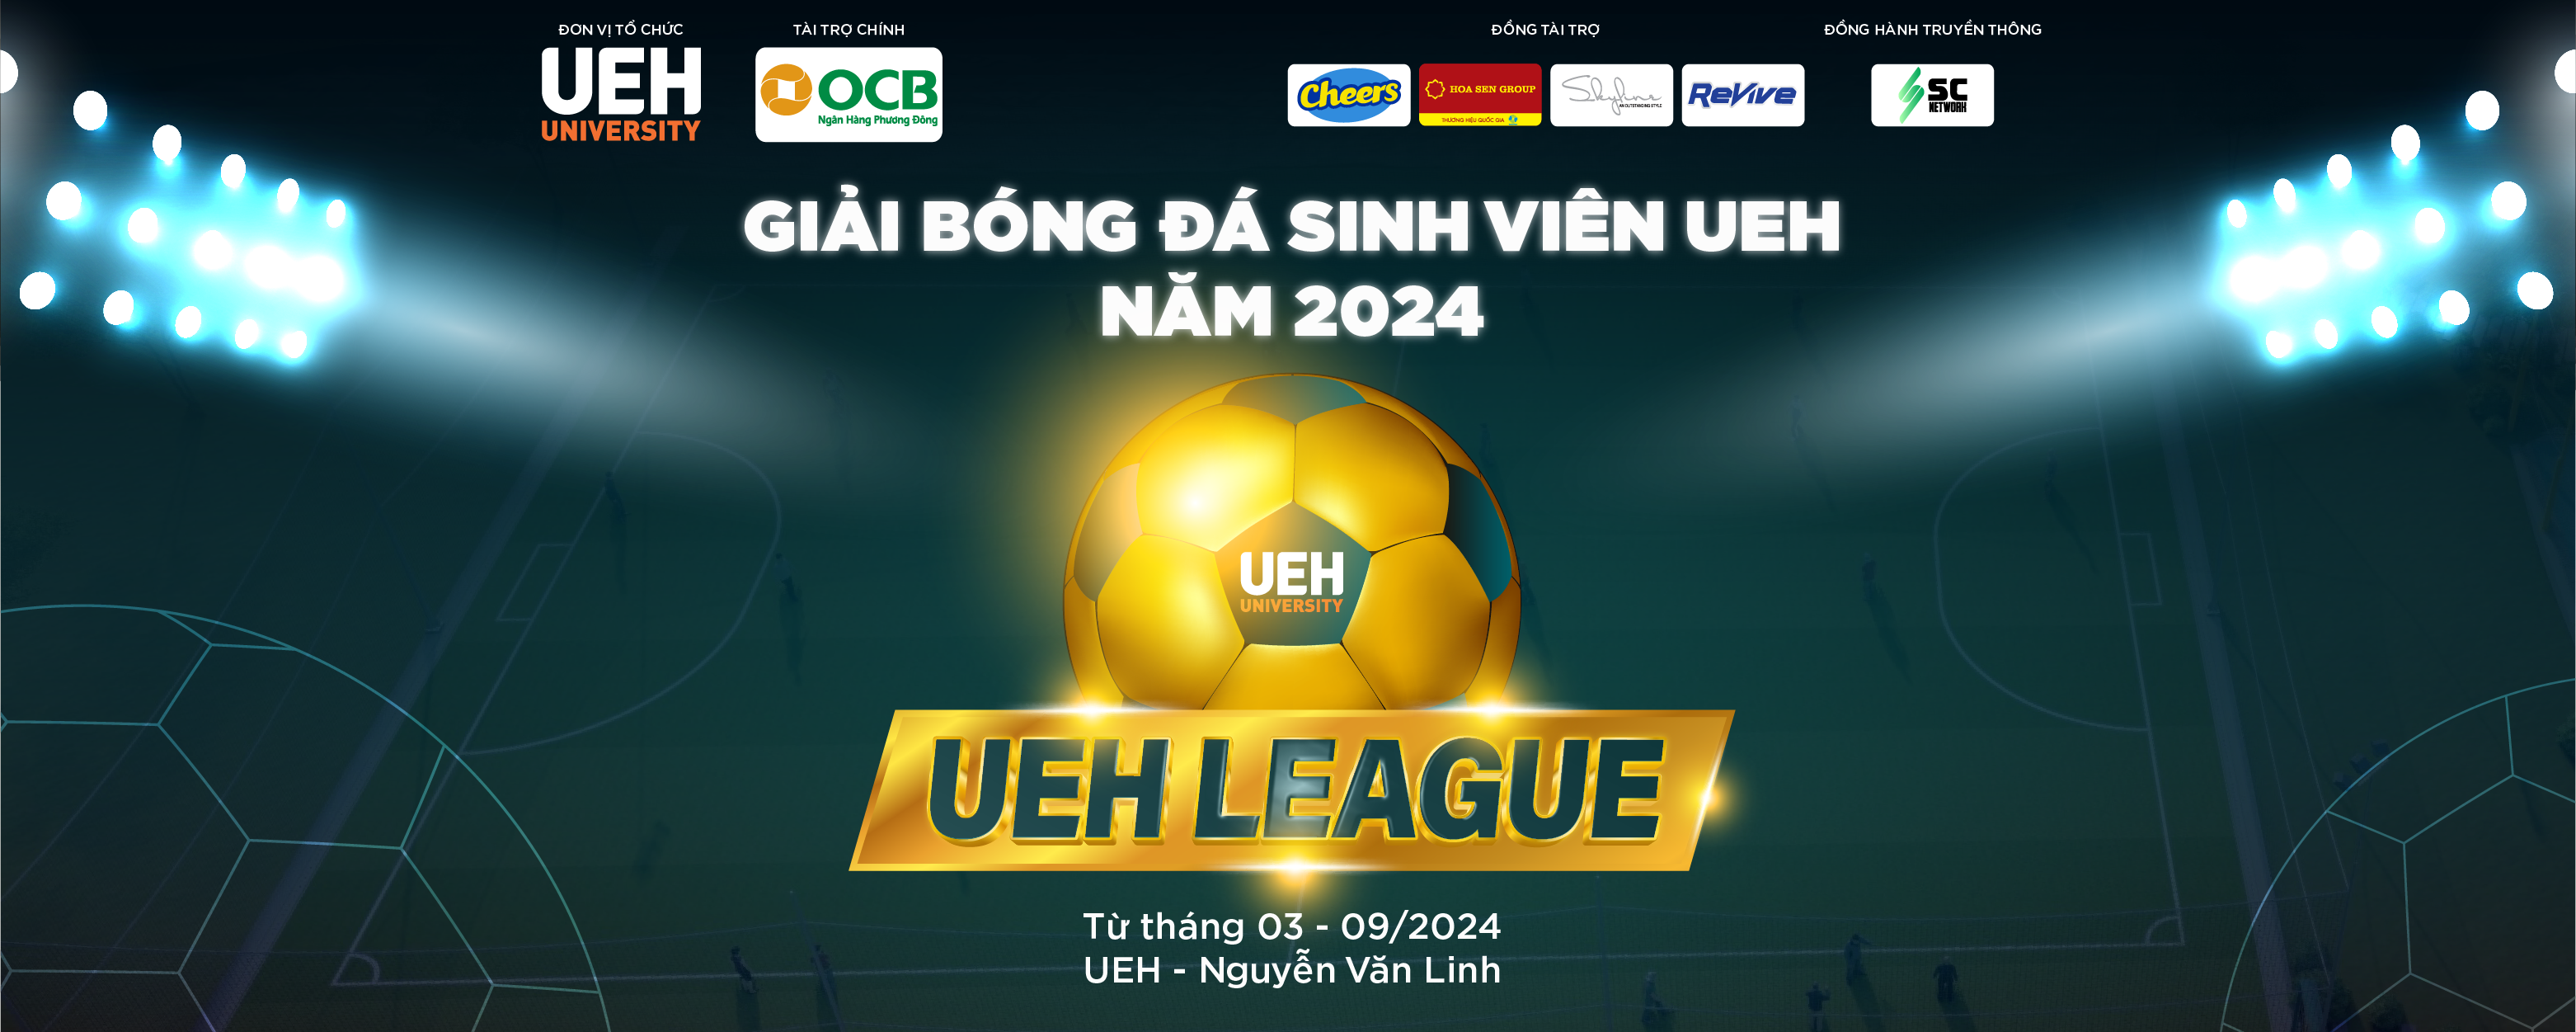 UEH organizing UEH League - Student Football Tournament for the first time

